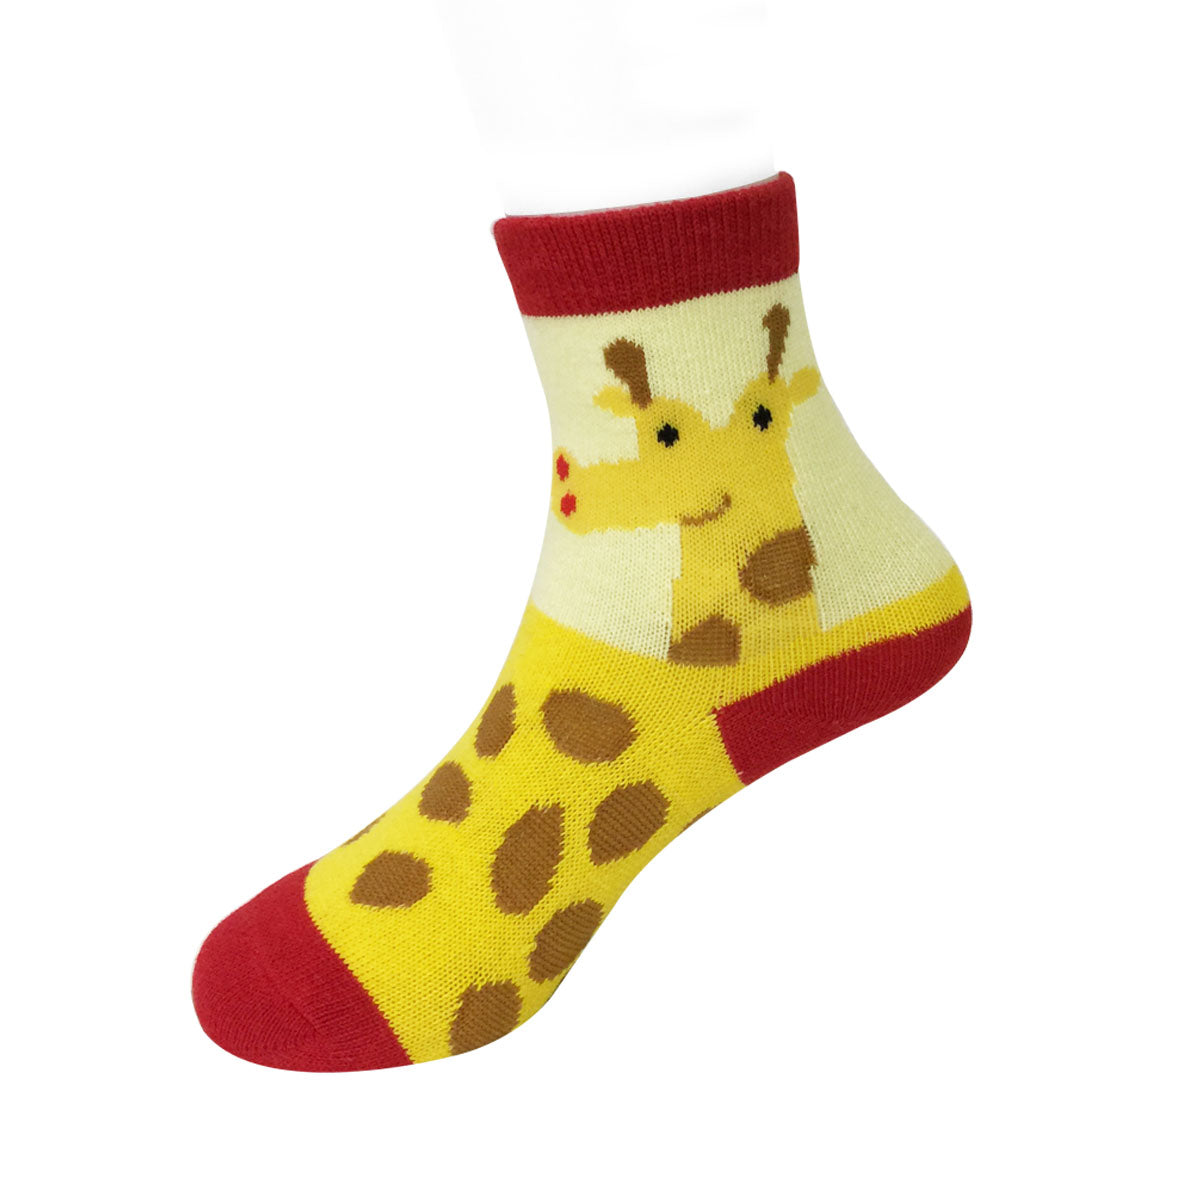 Wrapables Funny Zoo Animal Socks for Toddlers (Set of 3)